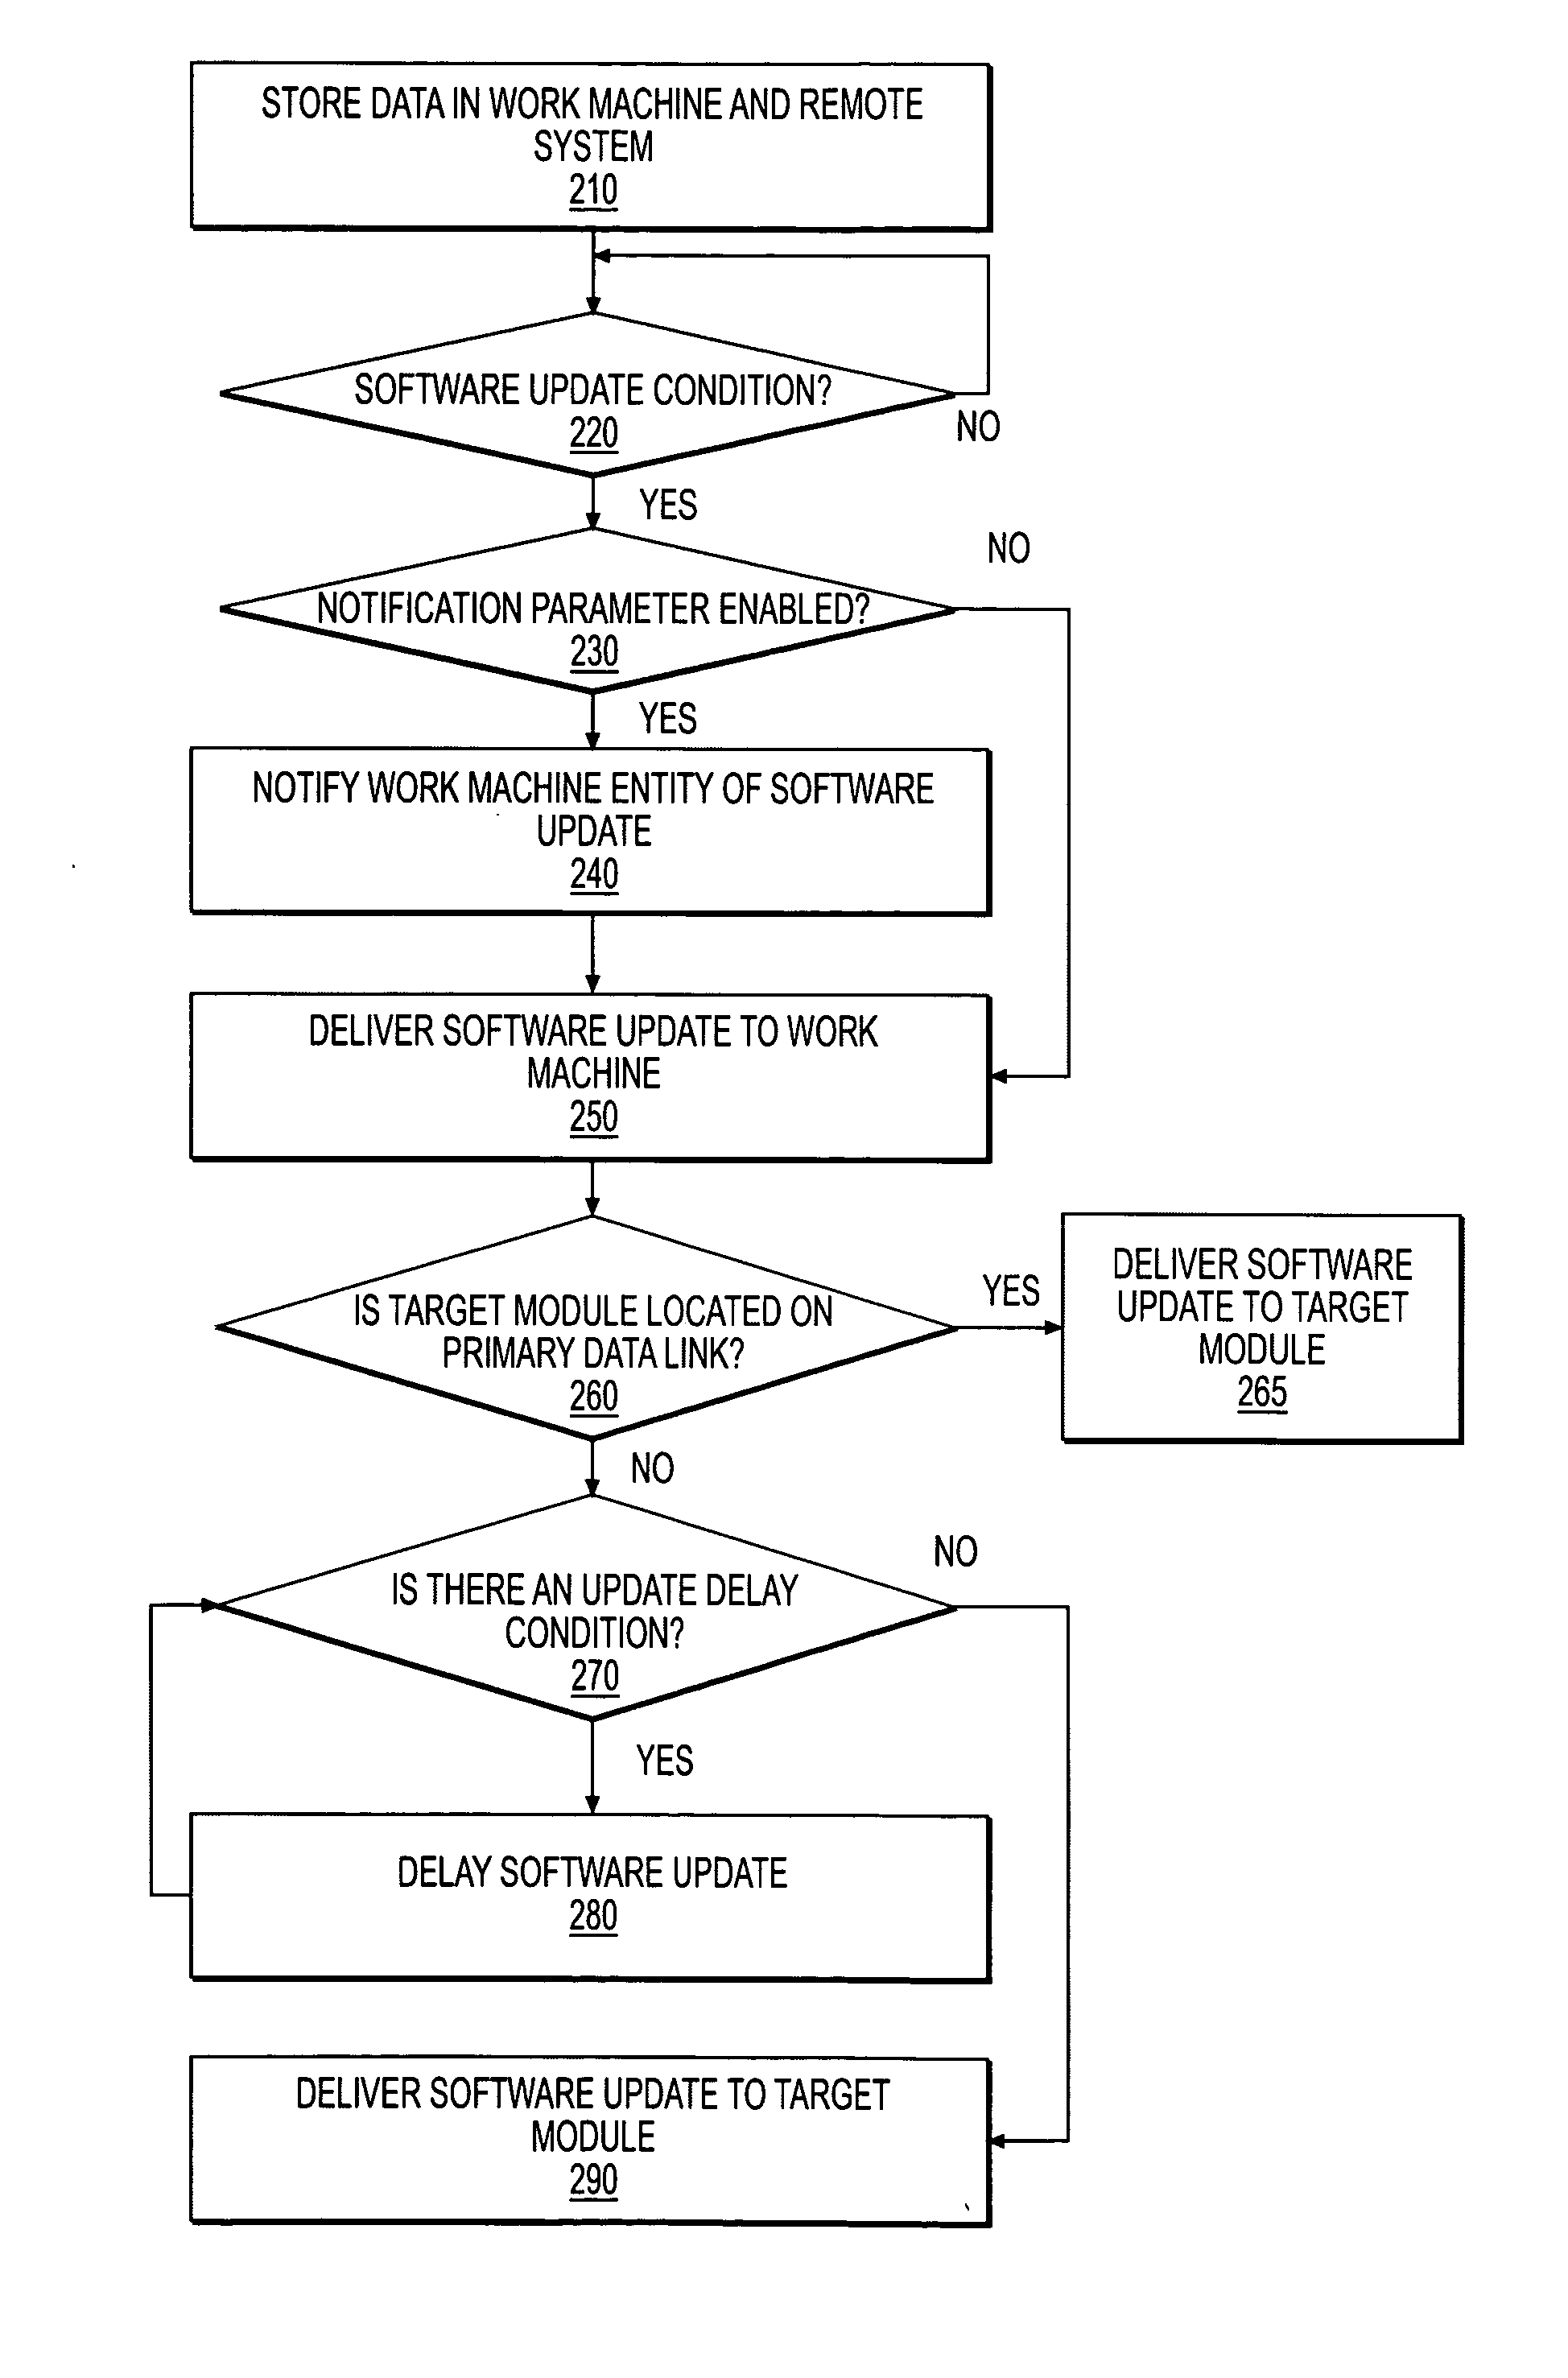 Systems and methods for remotely modifying software on a work machine